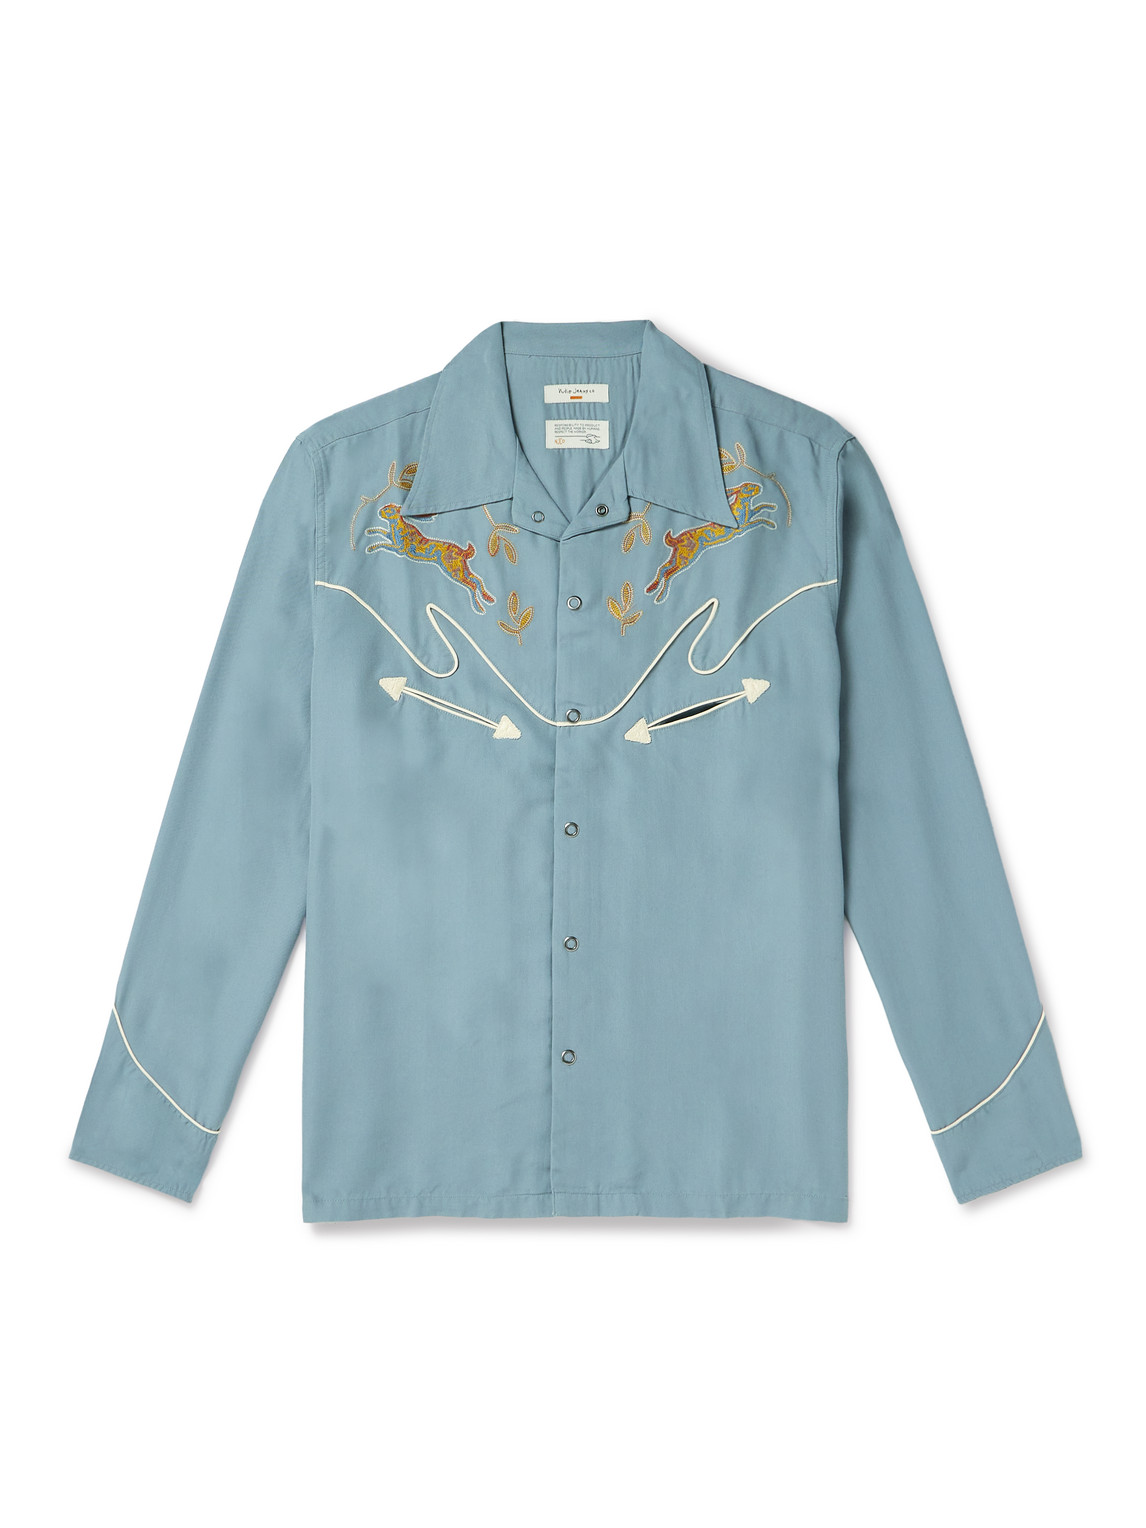 NUDIE JEANS GONZO EMBROIDERED TENCEL™ LYOCELL WESTERN SHIRT